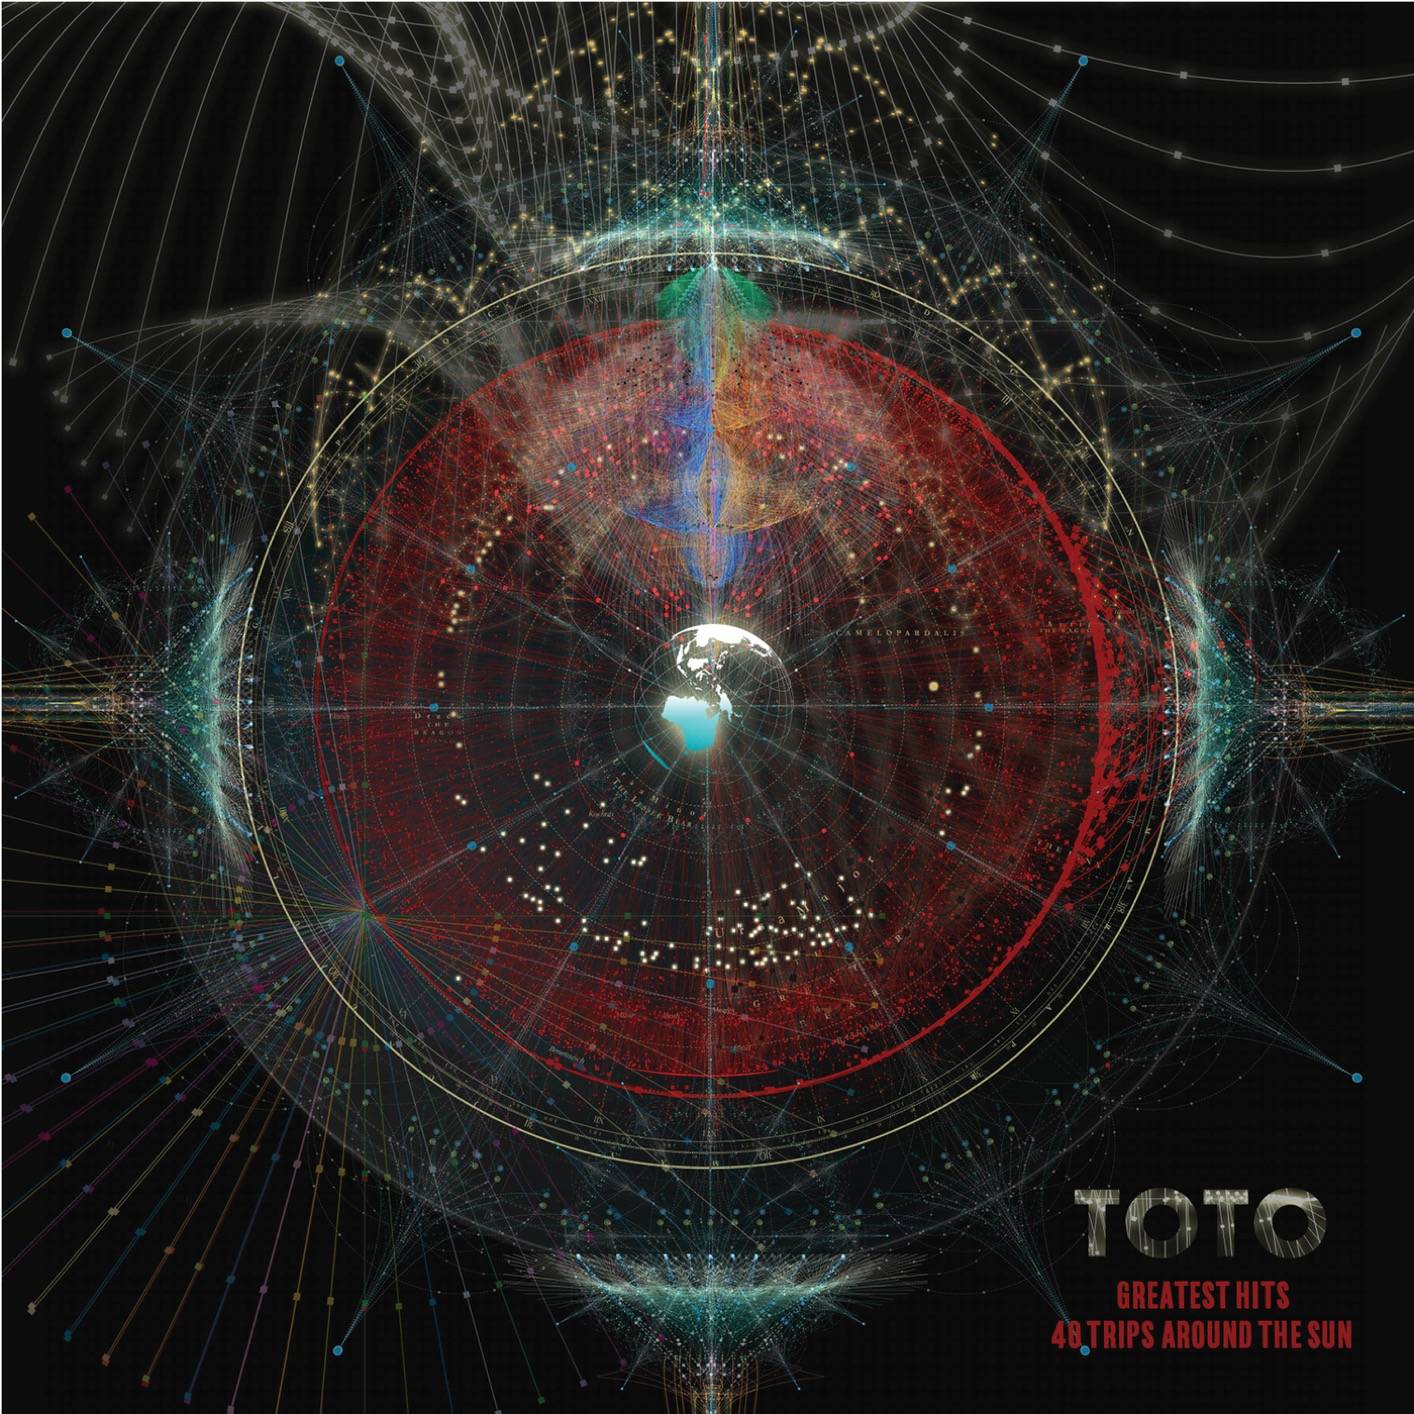 Toto - Greatest Hits: 40 Trips Around The Sun (2018) [FLAC 24bit/44,1kHz]